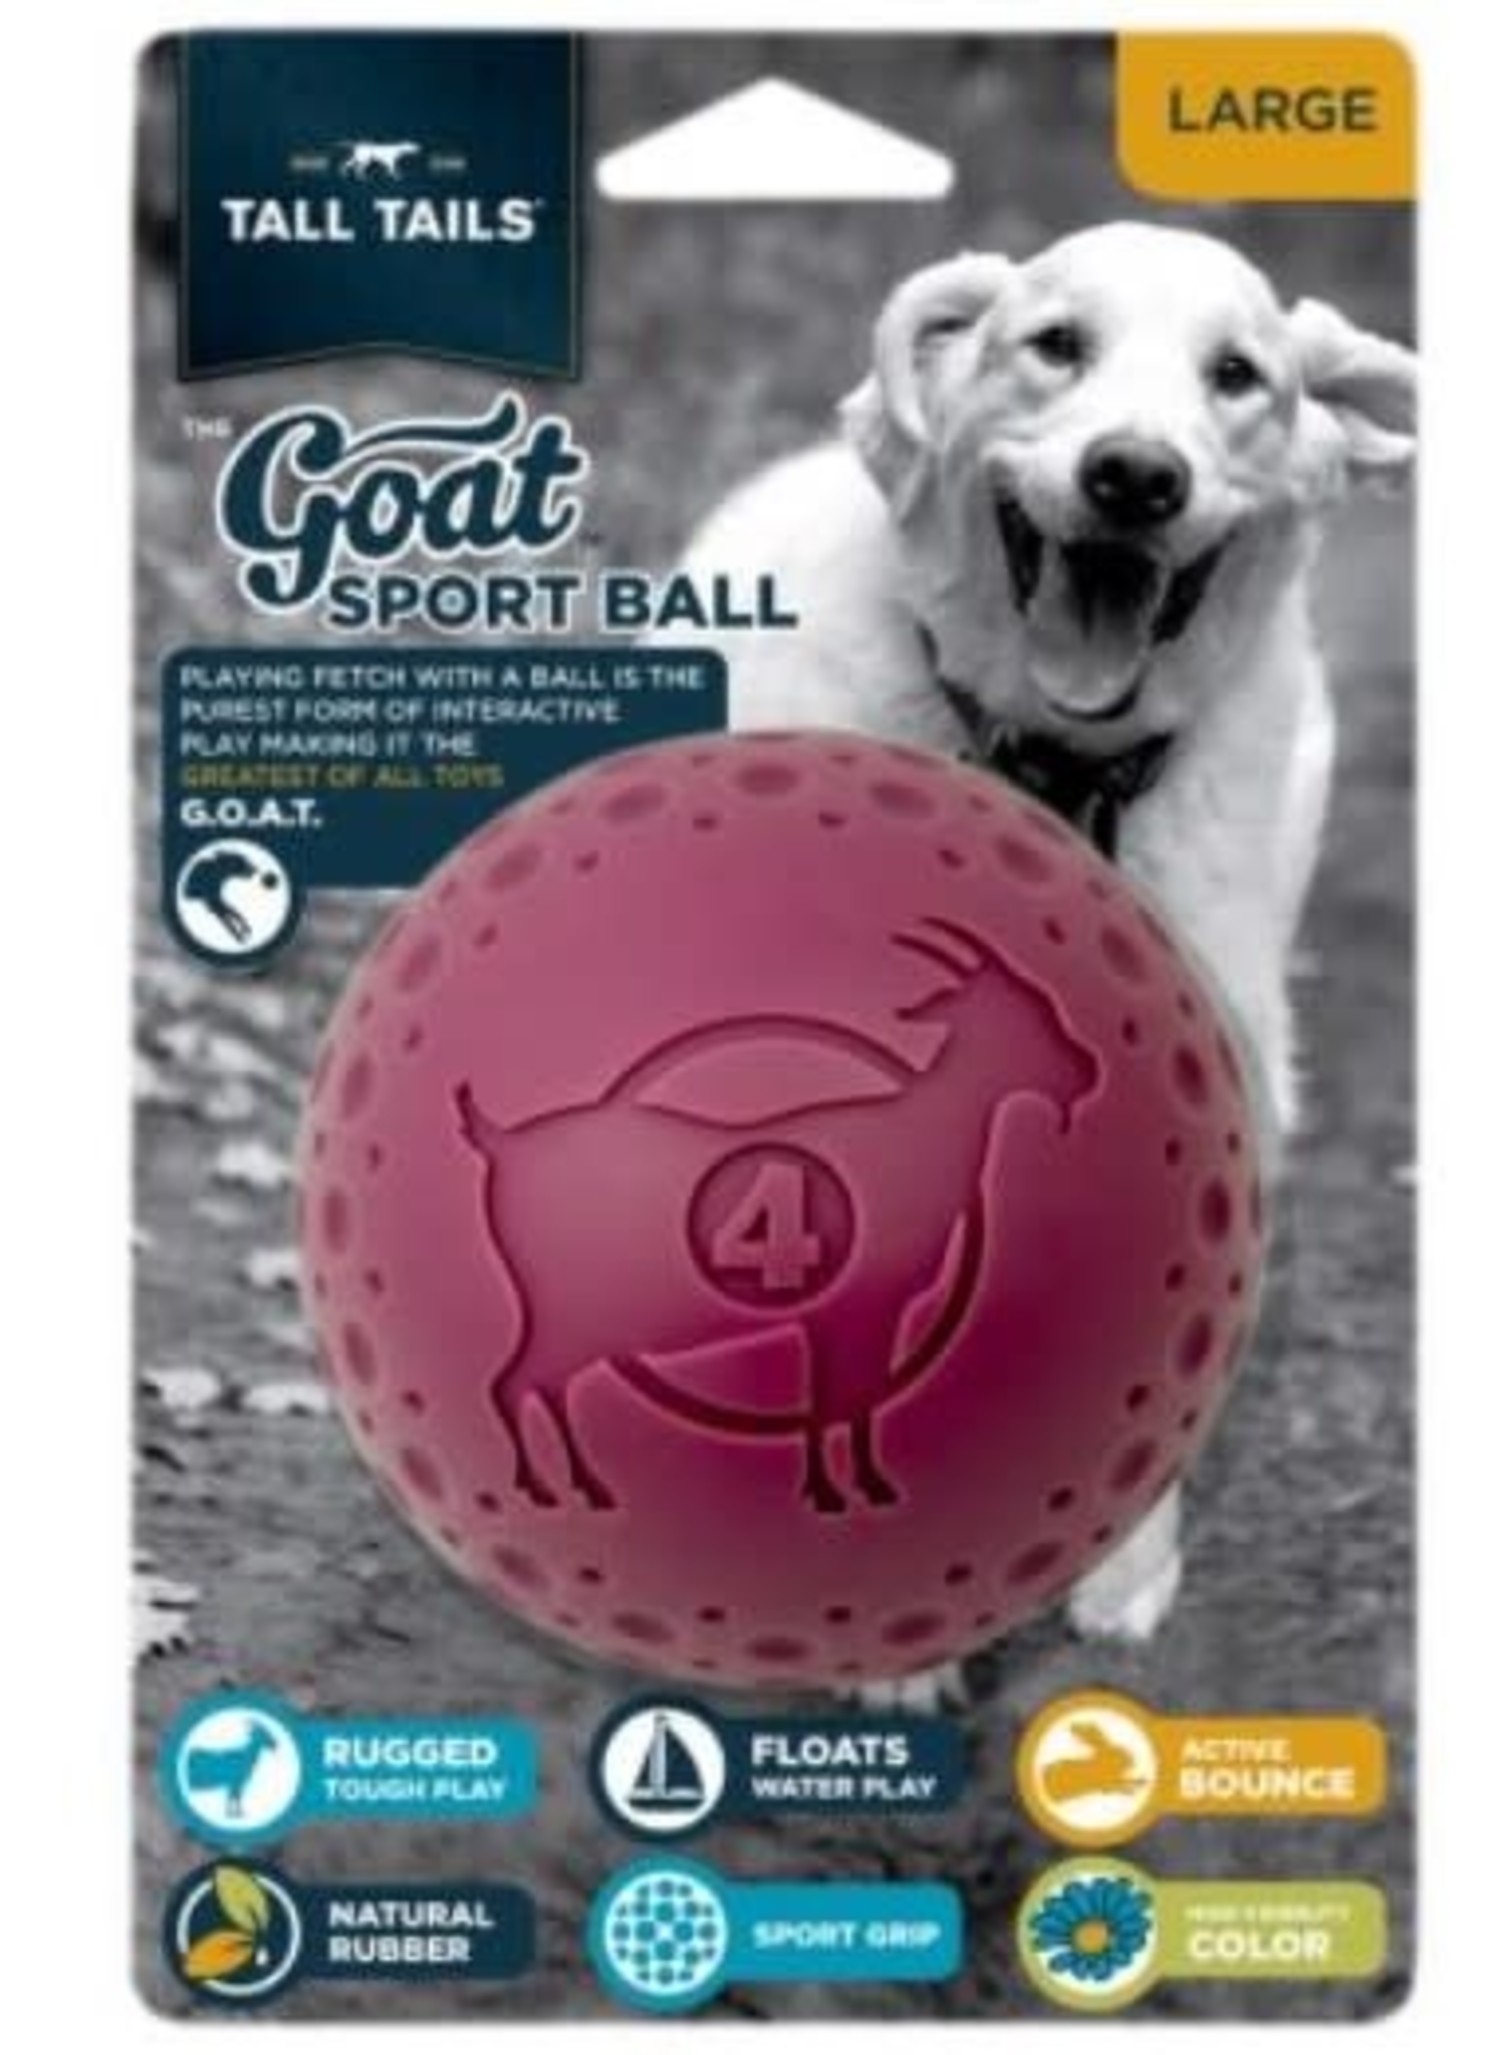 Tall Tails Goat Sport Ball Dog Toy